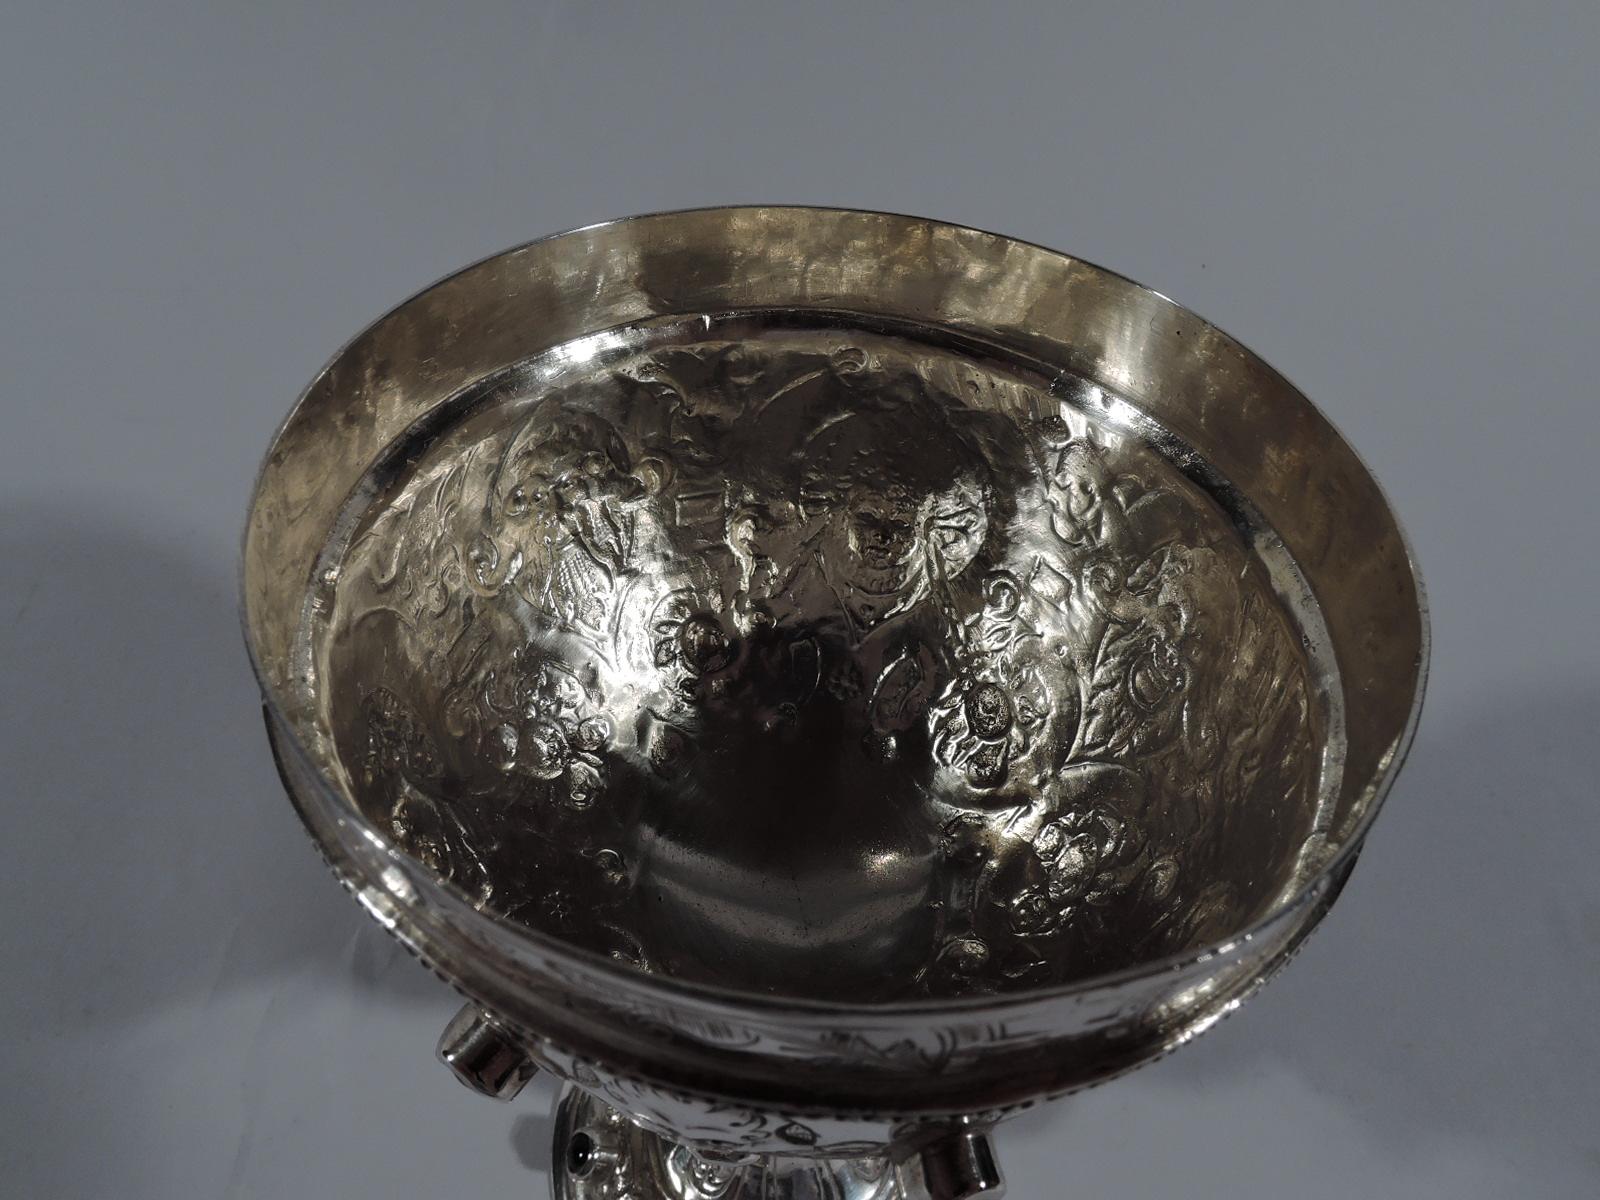 Jeweled sterling silver goblet. Imported to England in 1900 by James Swann. Round bowl on baluster stem on domed foot. Chased and engraved Classical masks in Strapwork frames as well as scrolls and flowers. Cabochon jewels in sterling silver mounts,